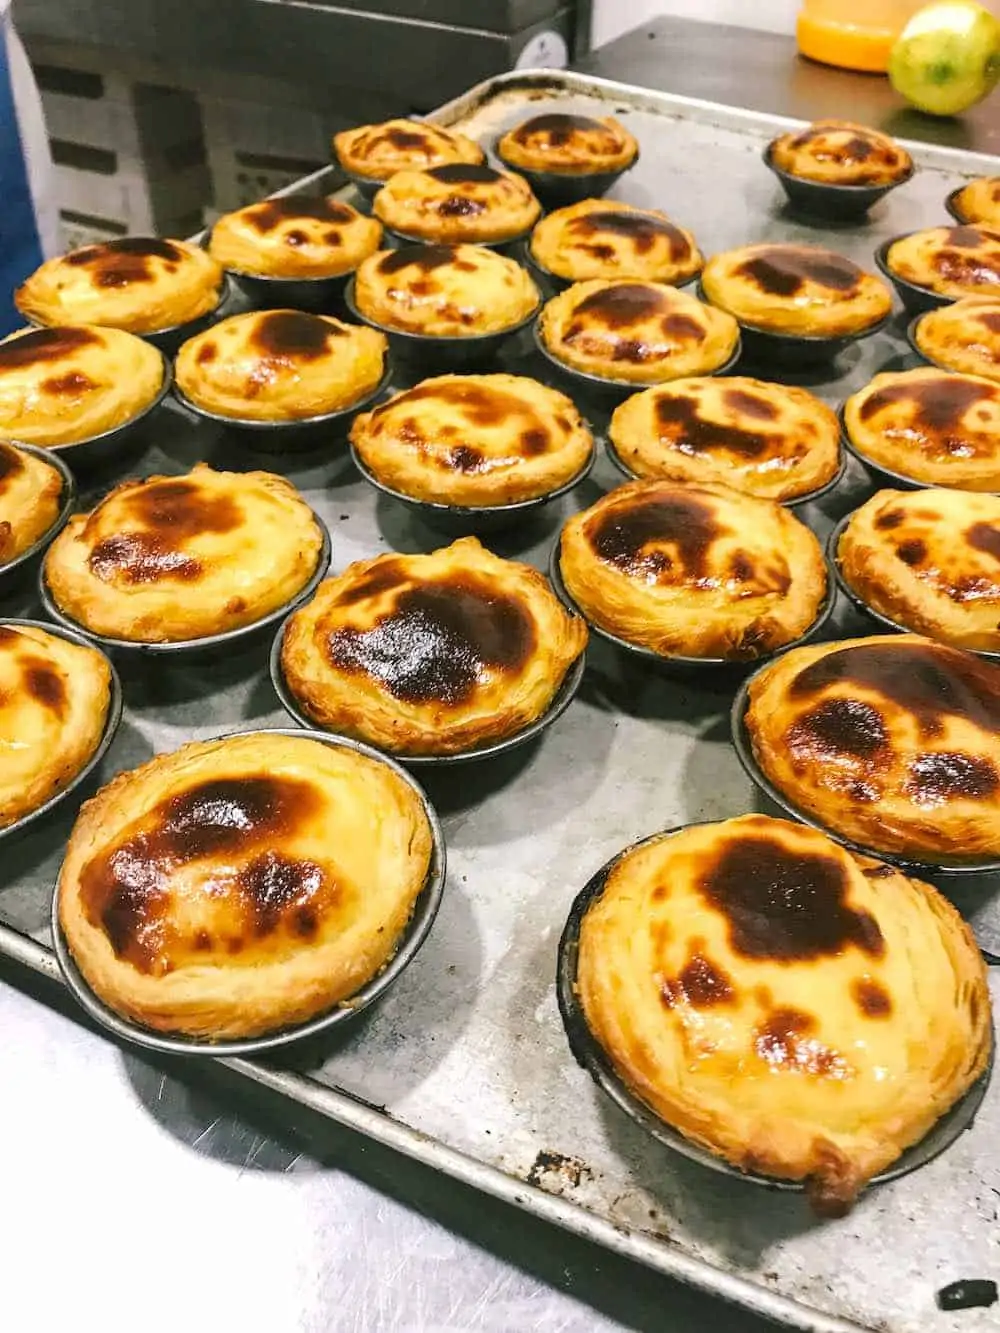 Pastéis de Nata pastry on a tray in Portugal..